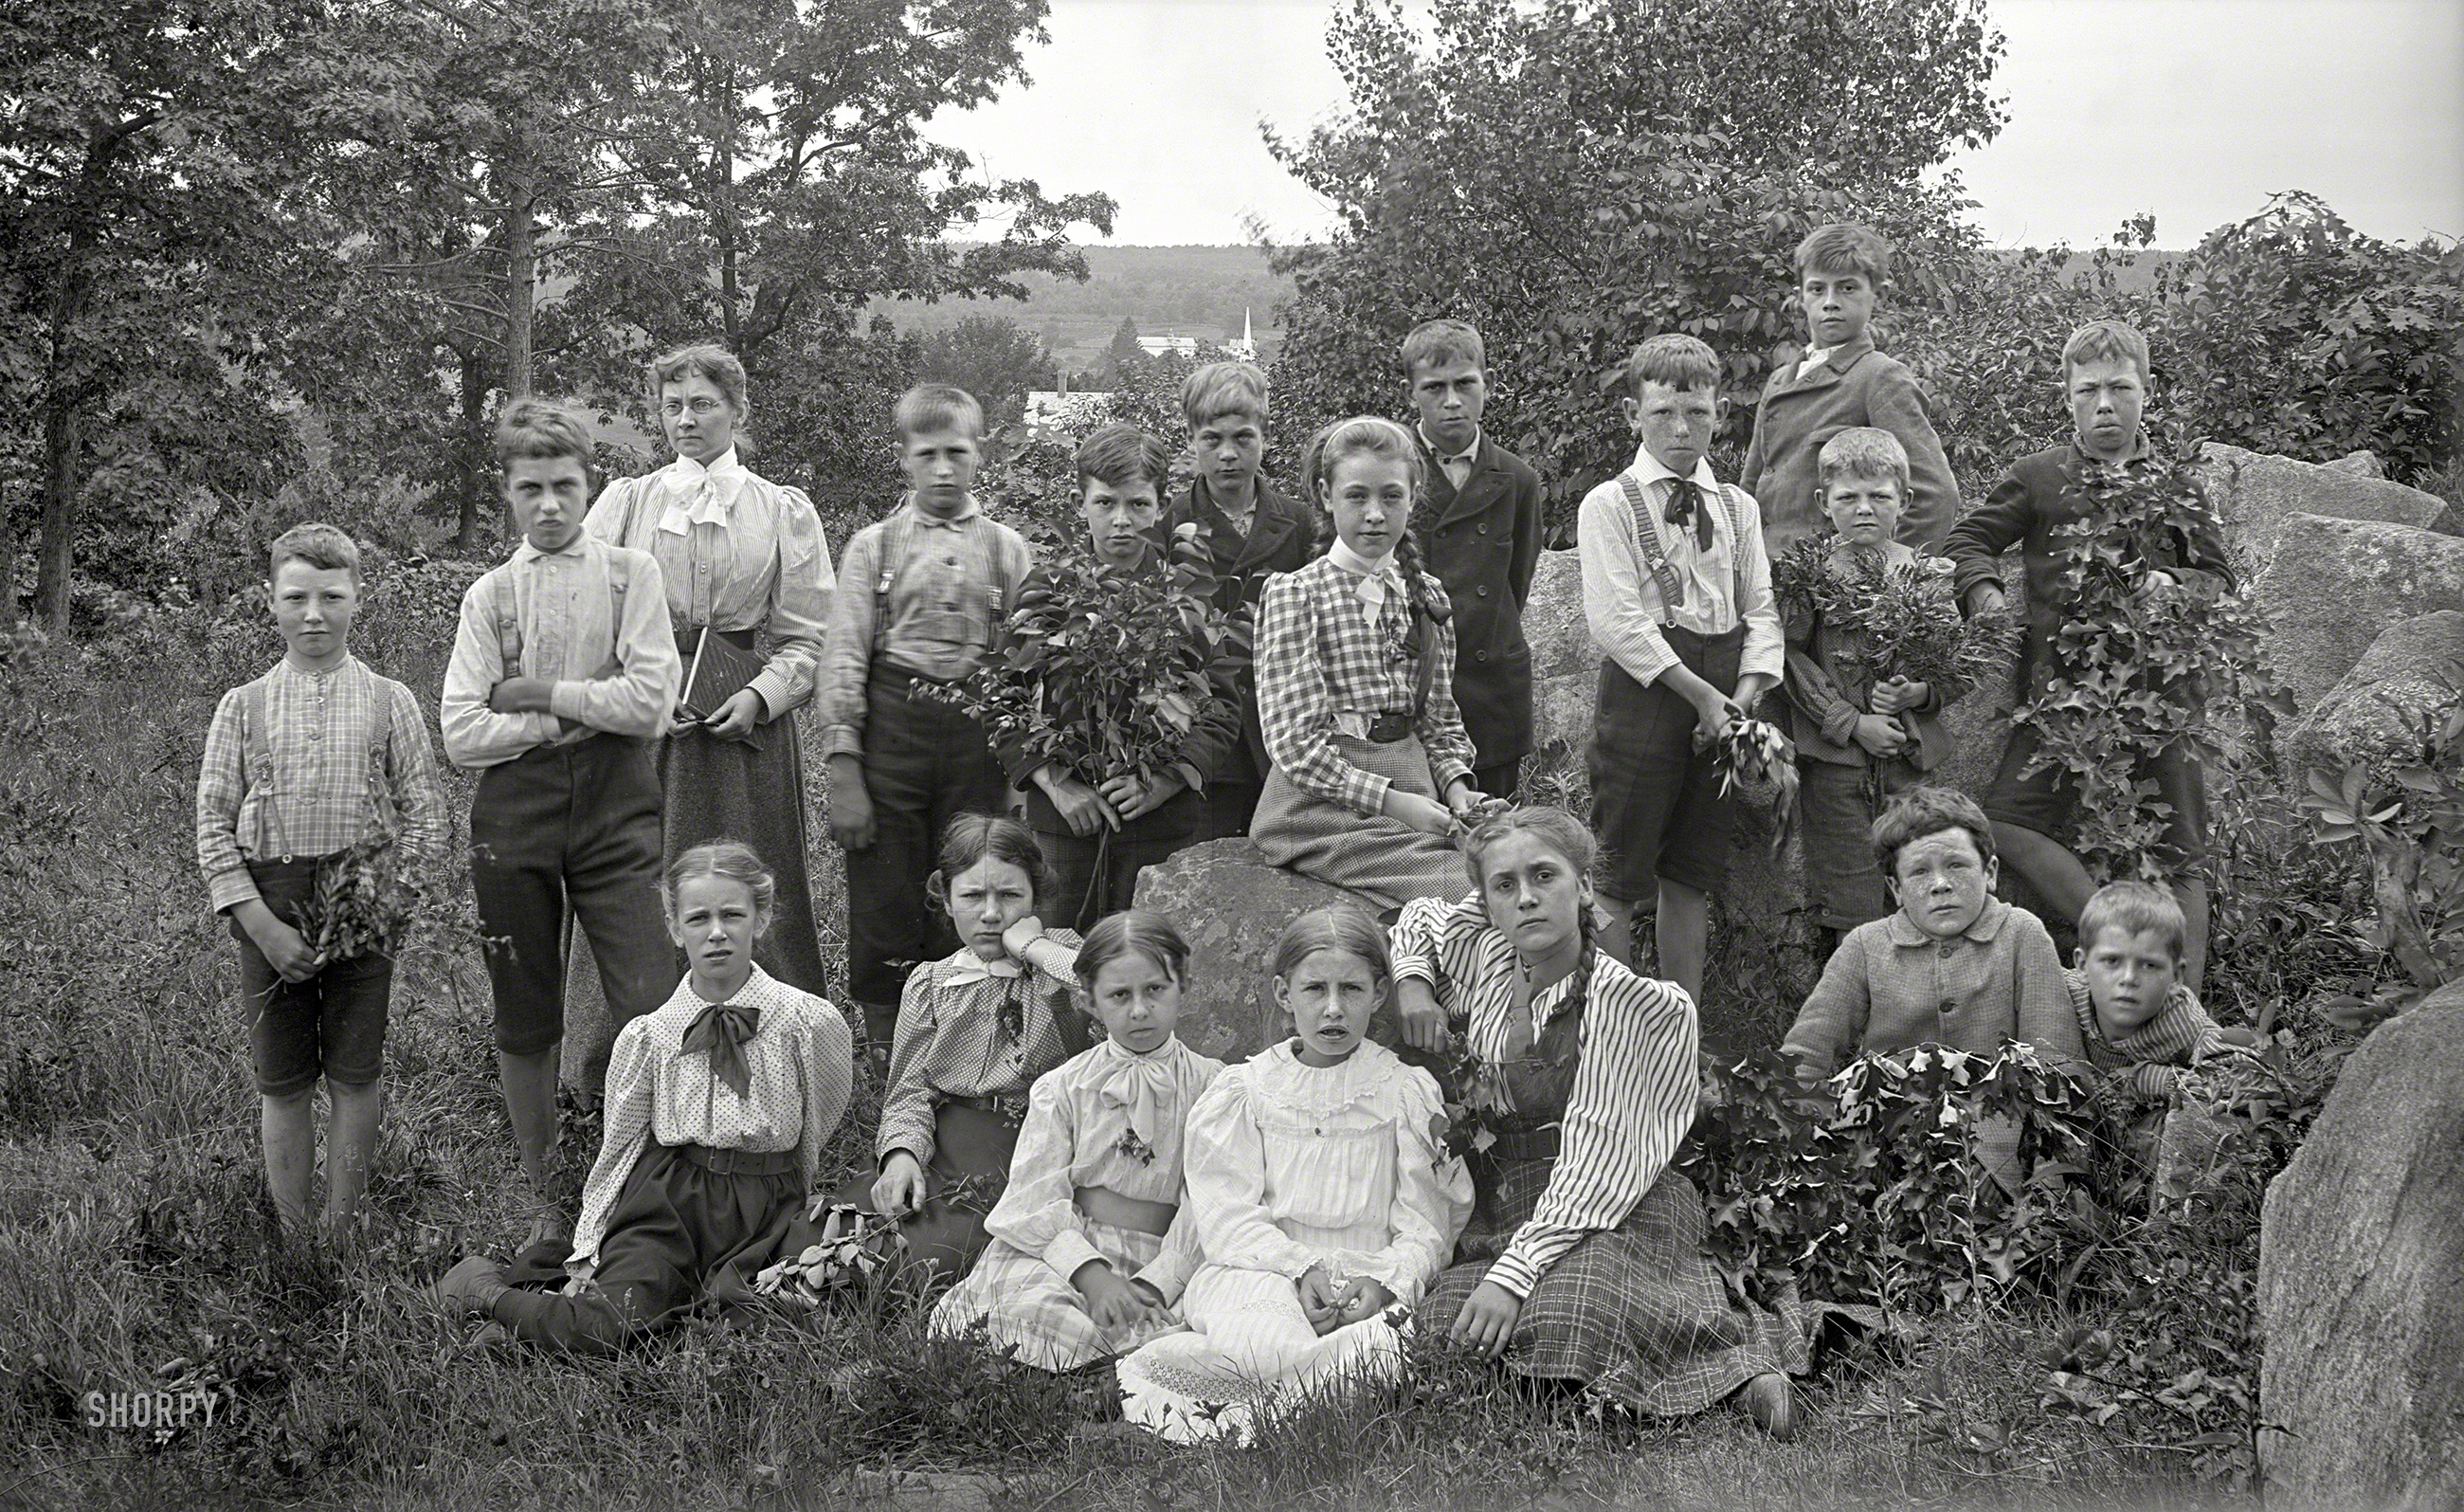 From somewhere in New England circa 1900 comes the final plate from our recent batch of serious-looking class photos, this group being particularly well camouflaged with greenery. 5x8 inch glass negative. View full size.